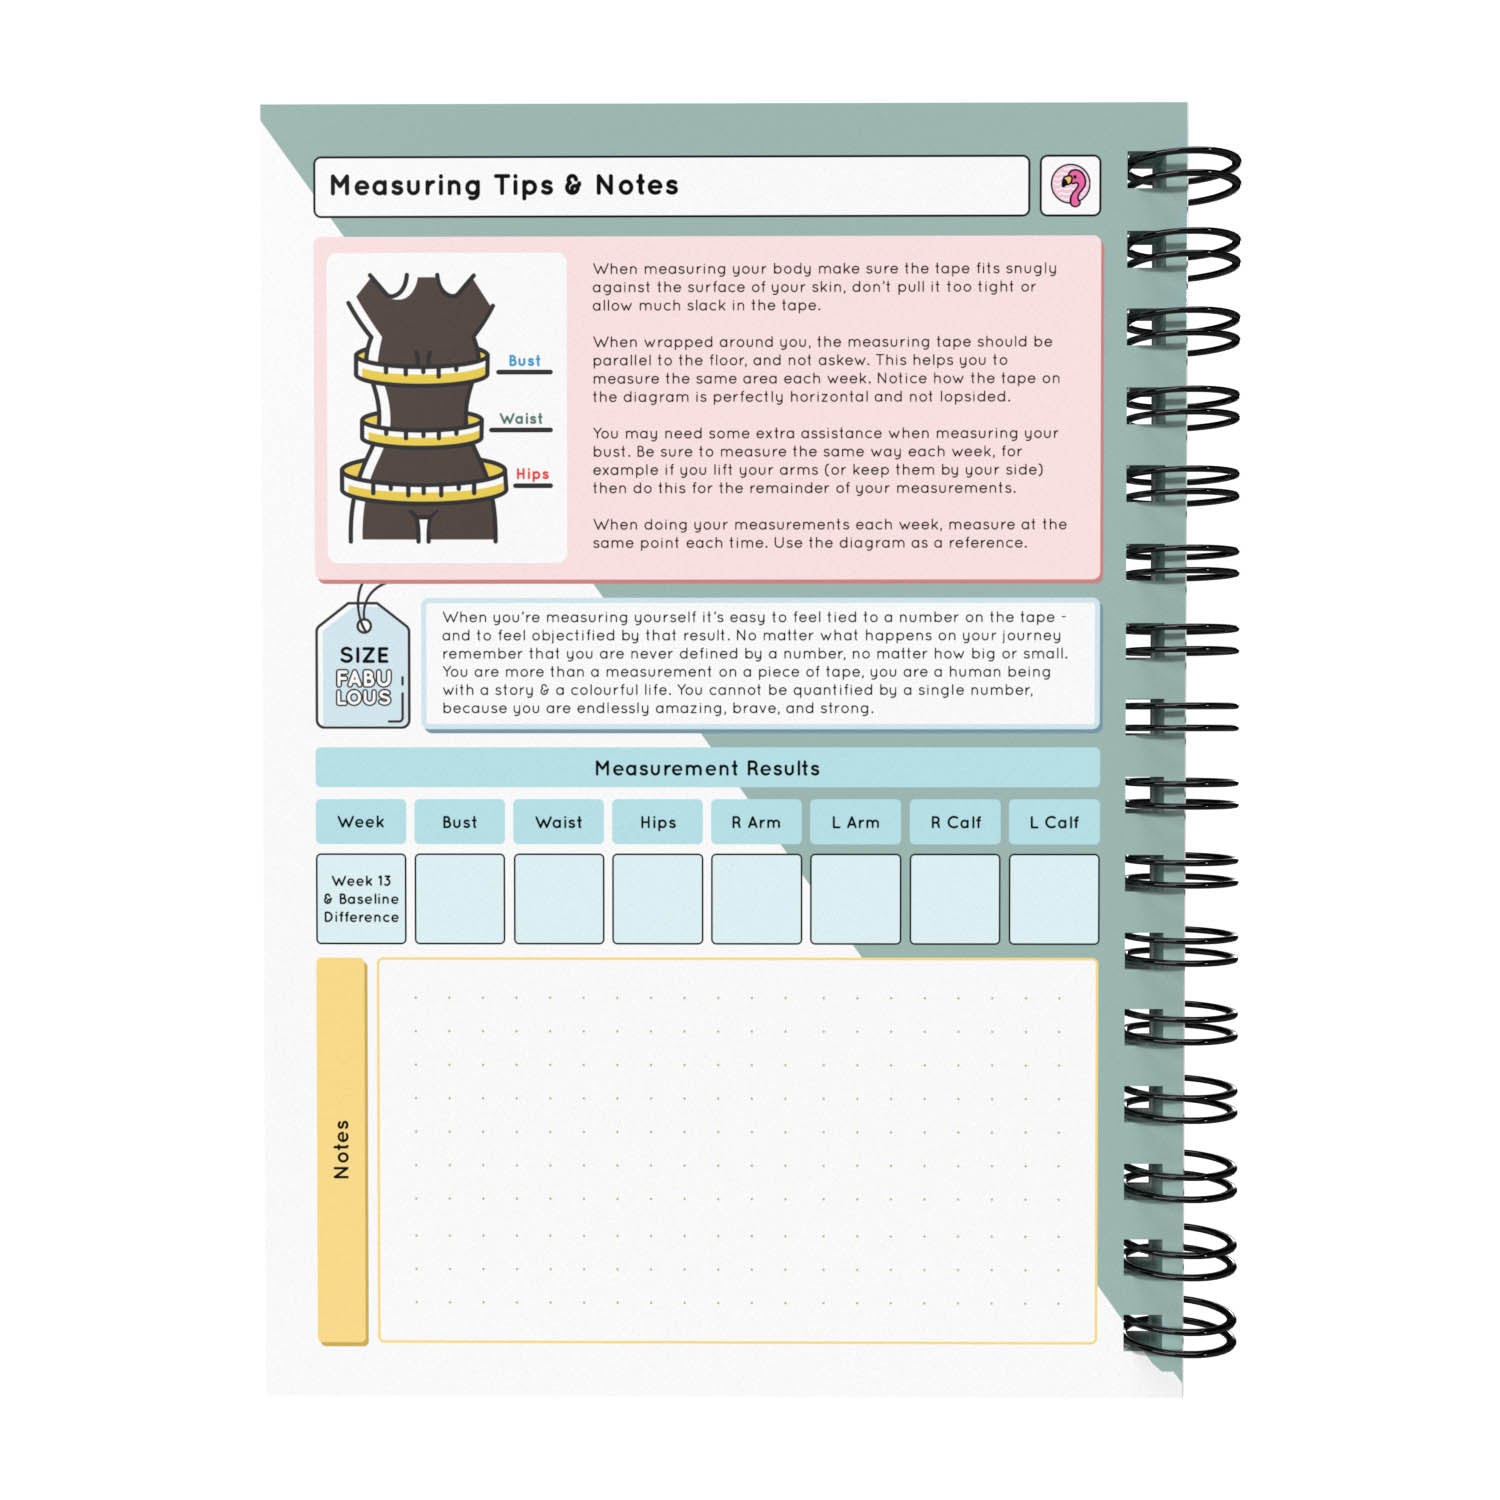 Food Diary - C61 - Weight Watchers Compatible - Fabulous Planning - [W] 3MTH - NWW - C61+